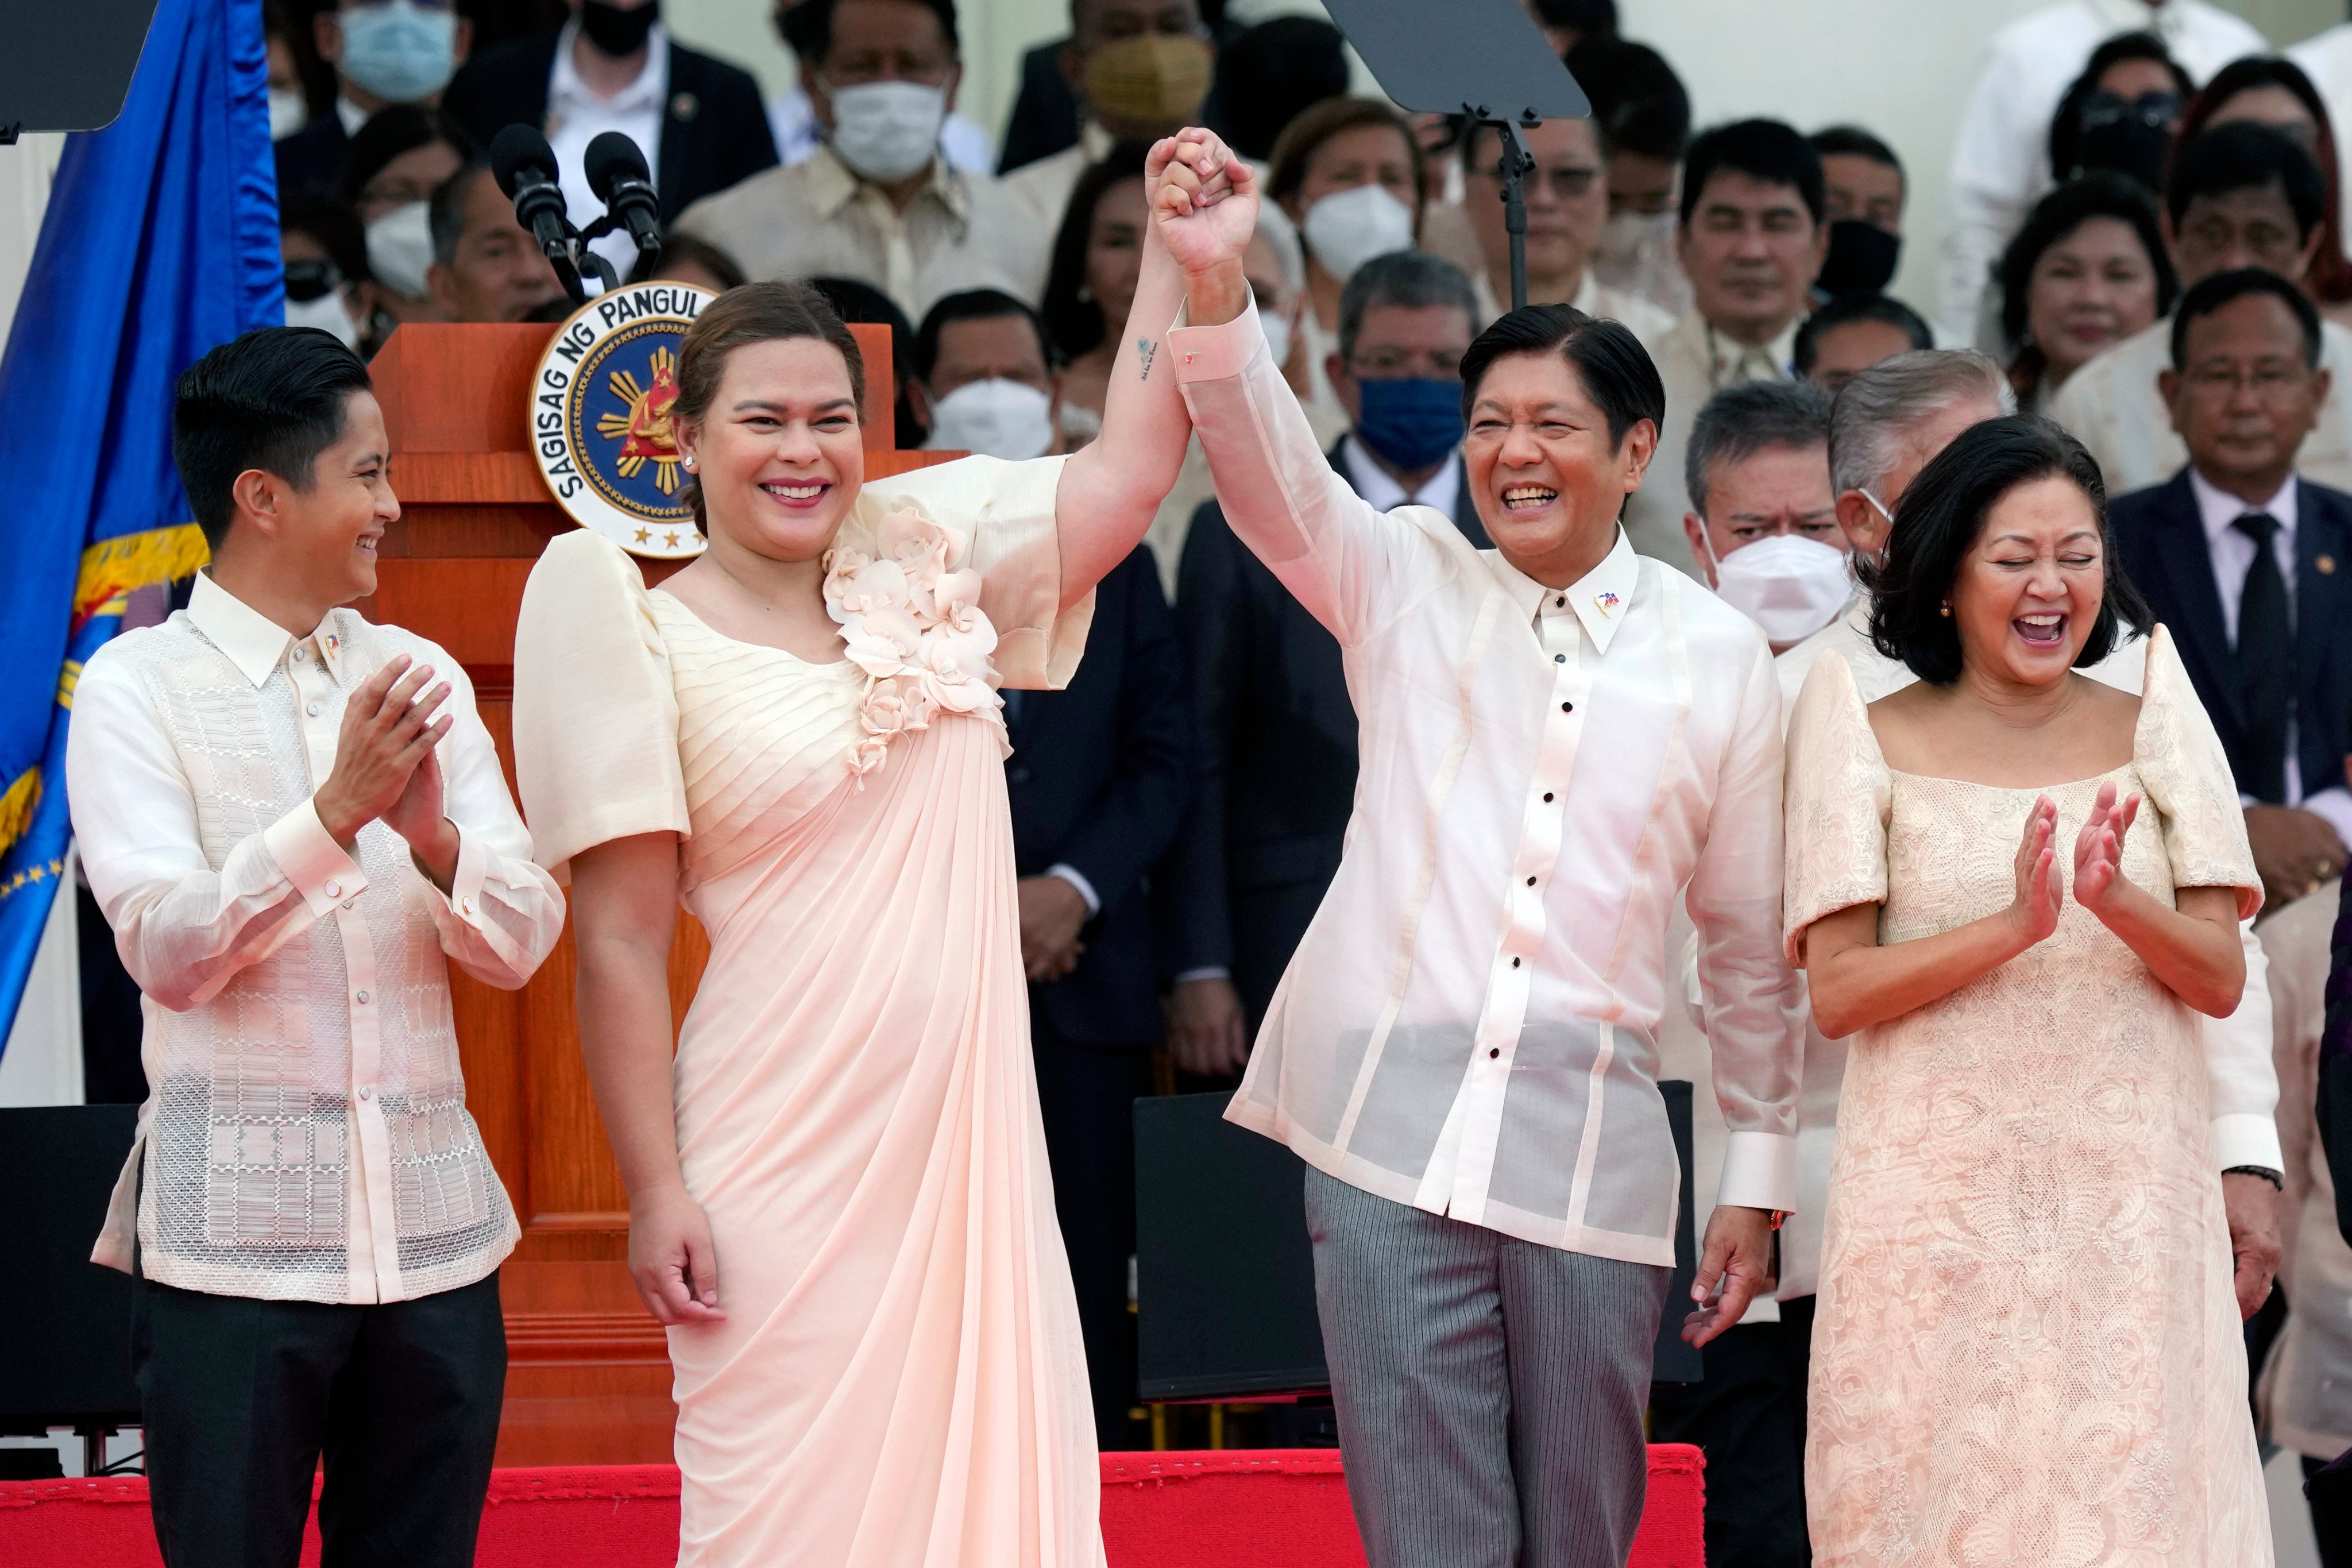 President Ferdinand Marcos Jnr and Philippine Vice-President Sara Duterte greet supporters during their inauguration ceremony at National Museum on June 30, 2022 in Manila. Photo: AP